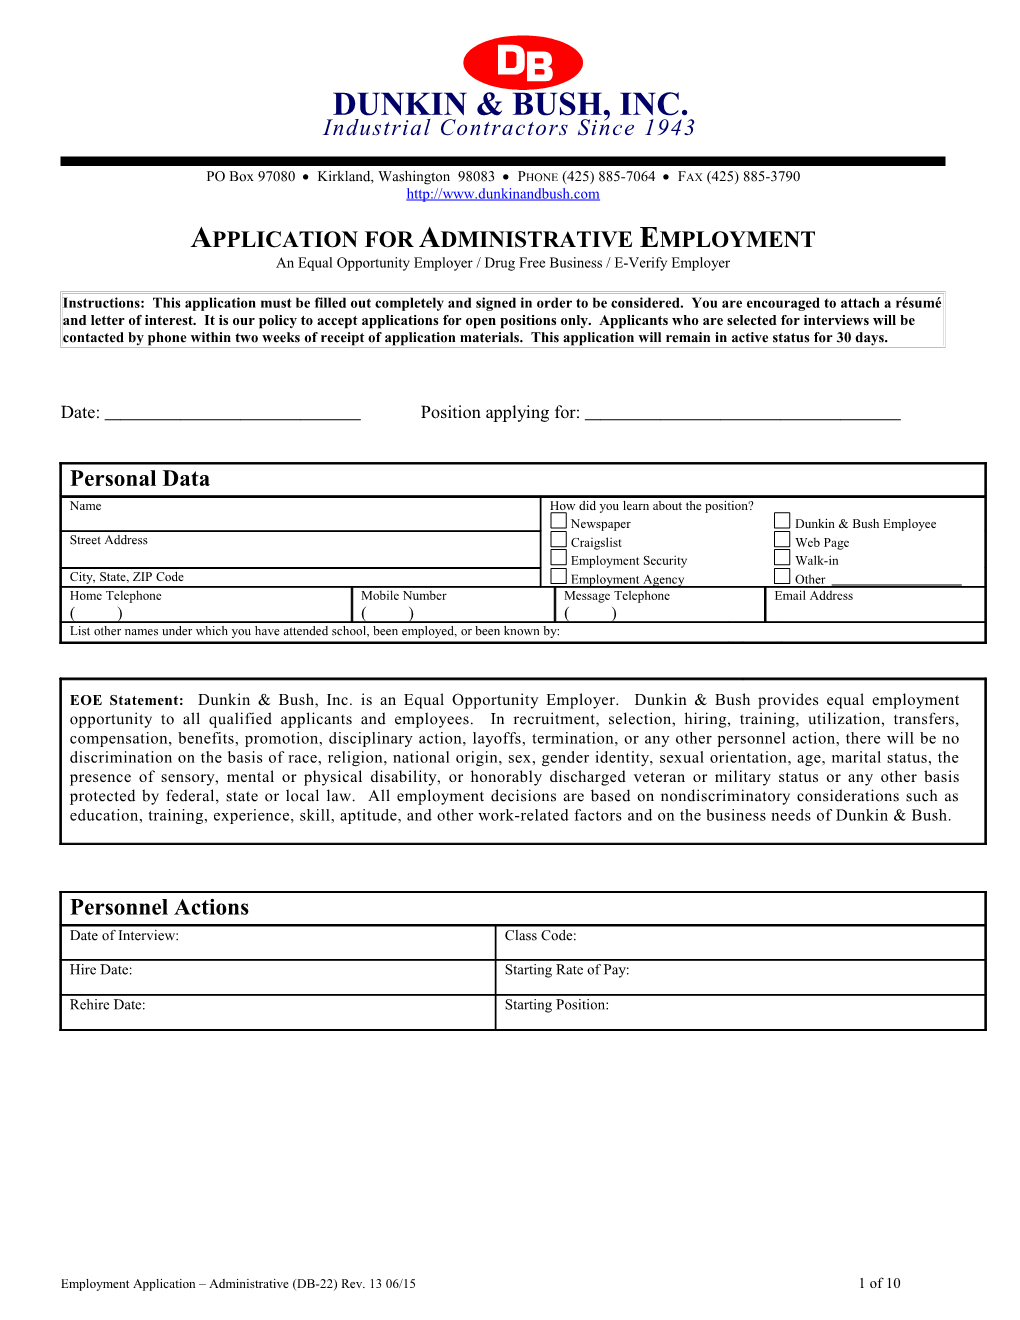 Application for Administrative Employment